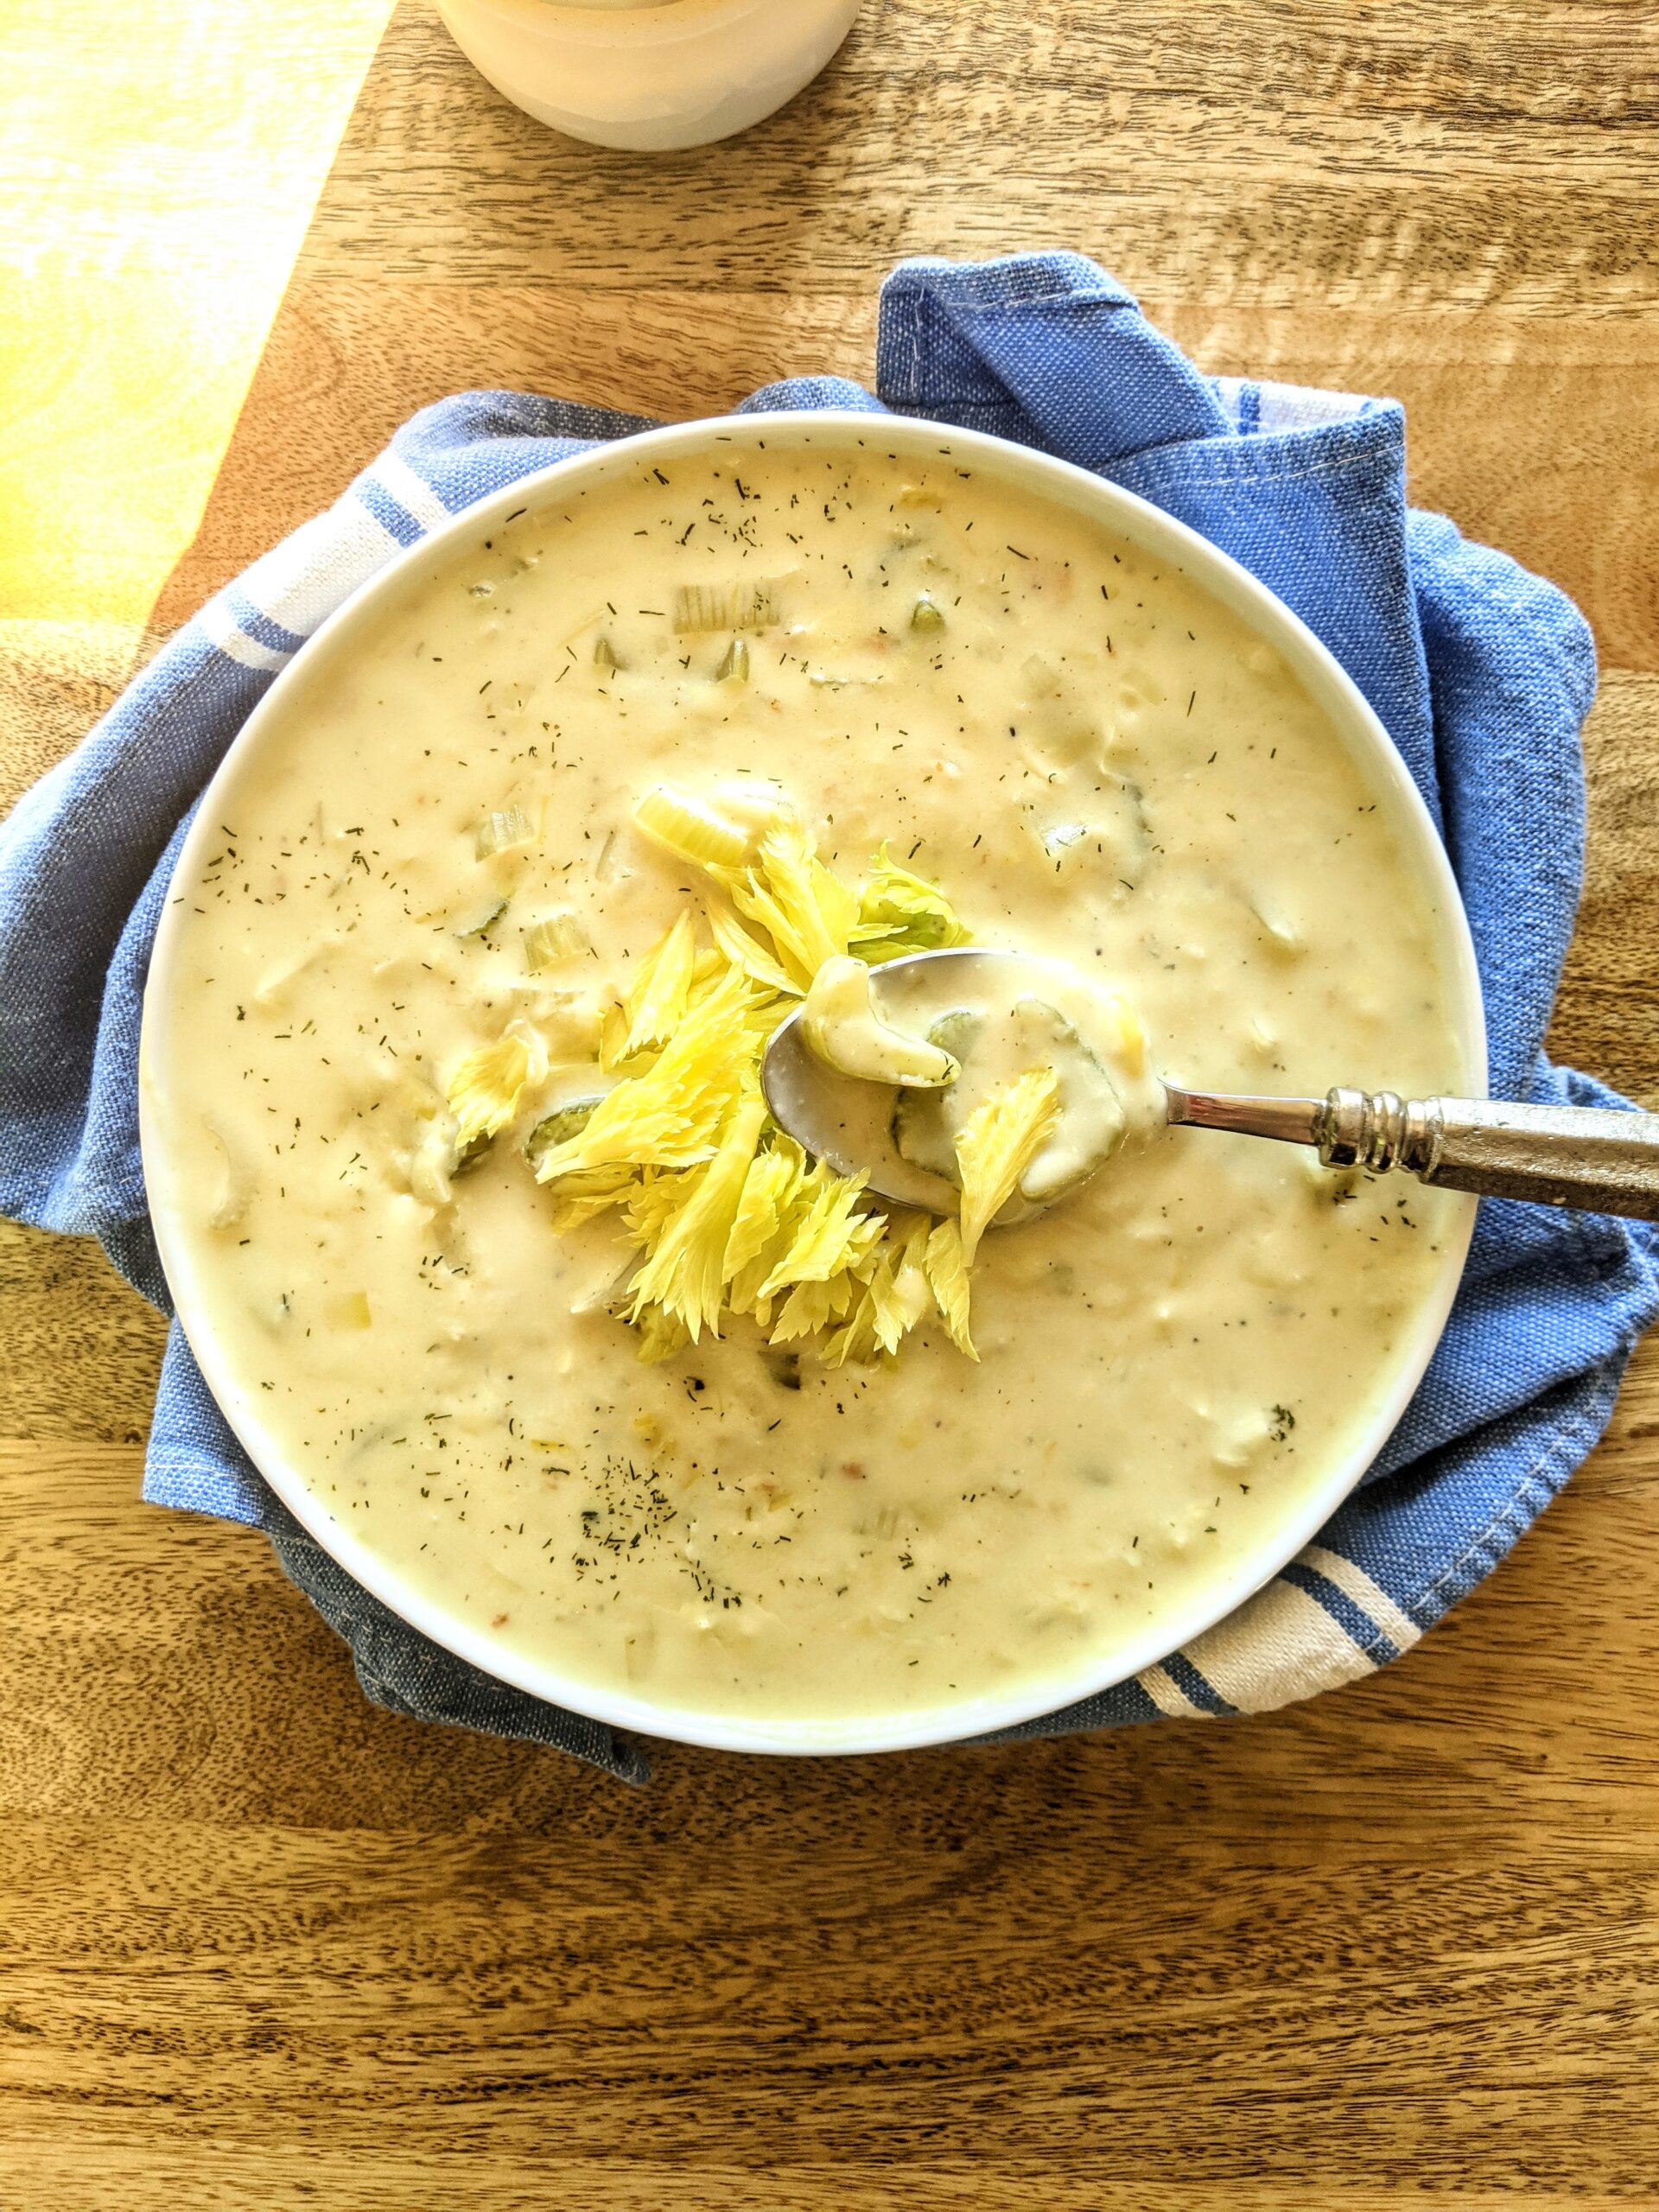 A bowl of comforting Cream of Celery Soup. A large spoonful showcasing pieces of celery, dill, celery leaves, and a thick & creamy chicken broth.